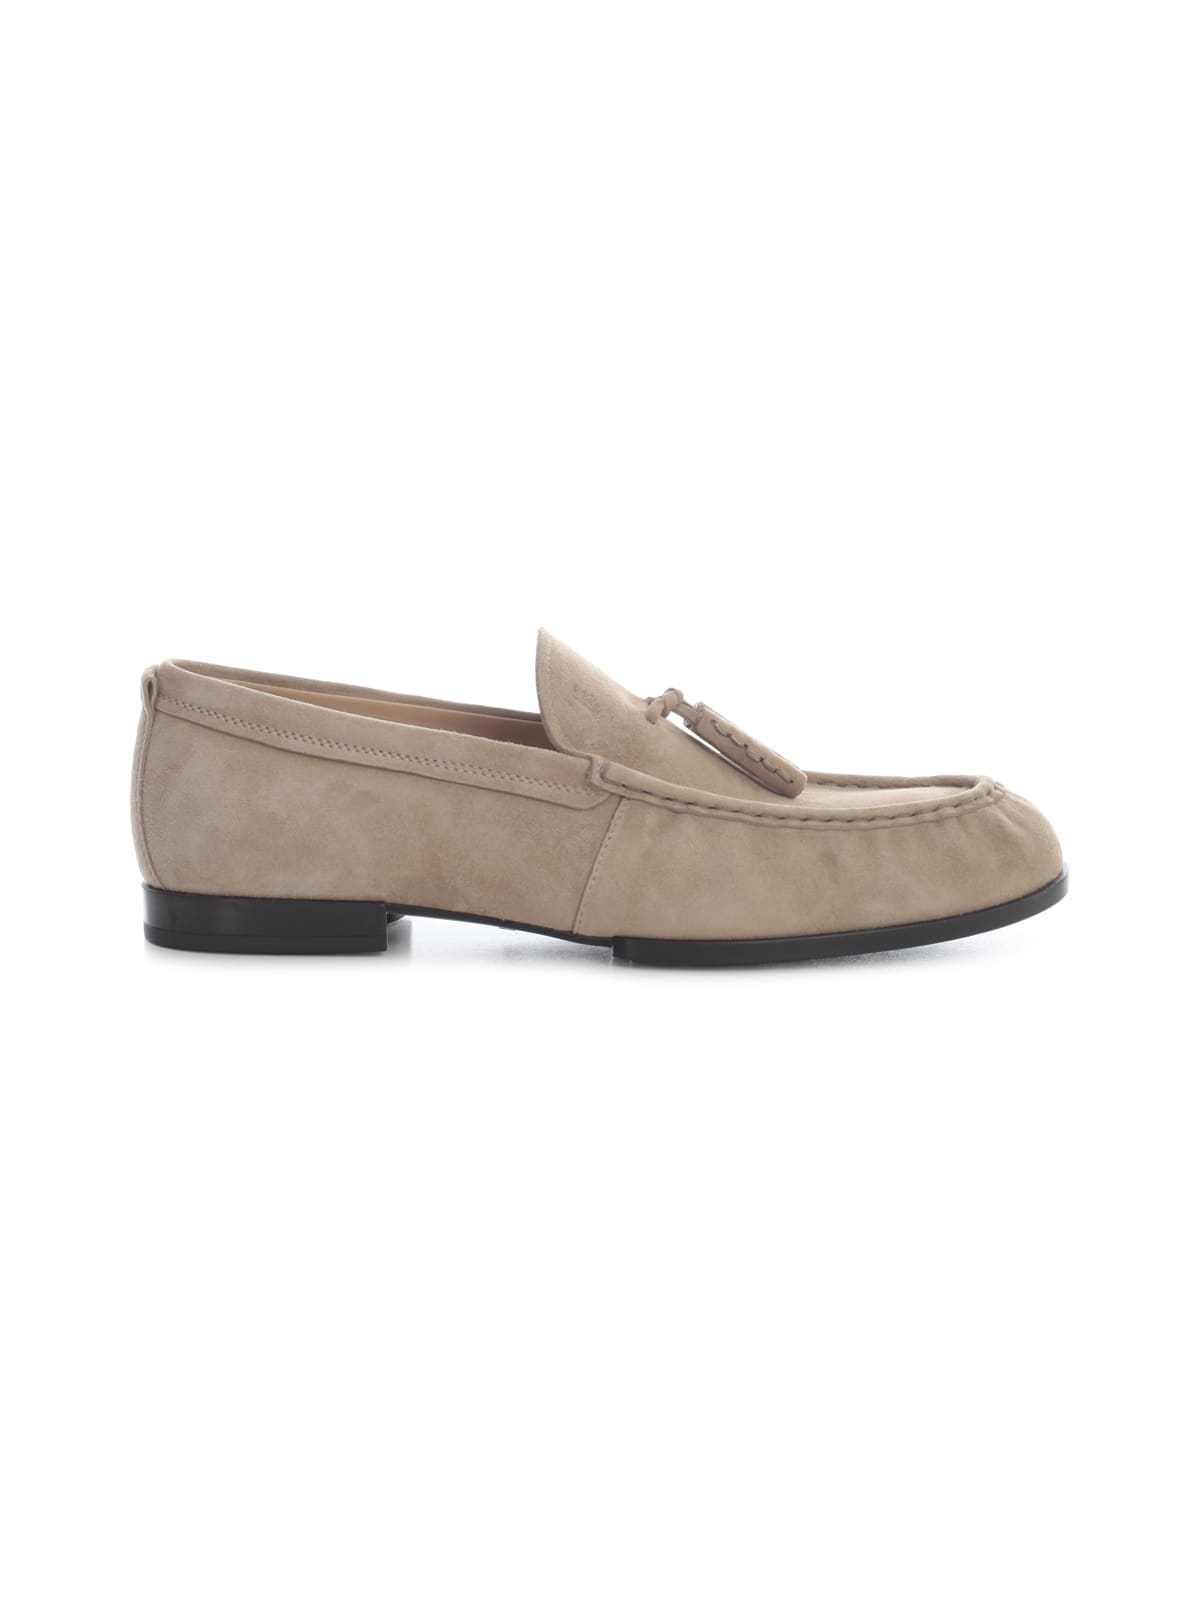 Tods Rubber Tassels Loafers